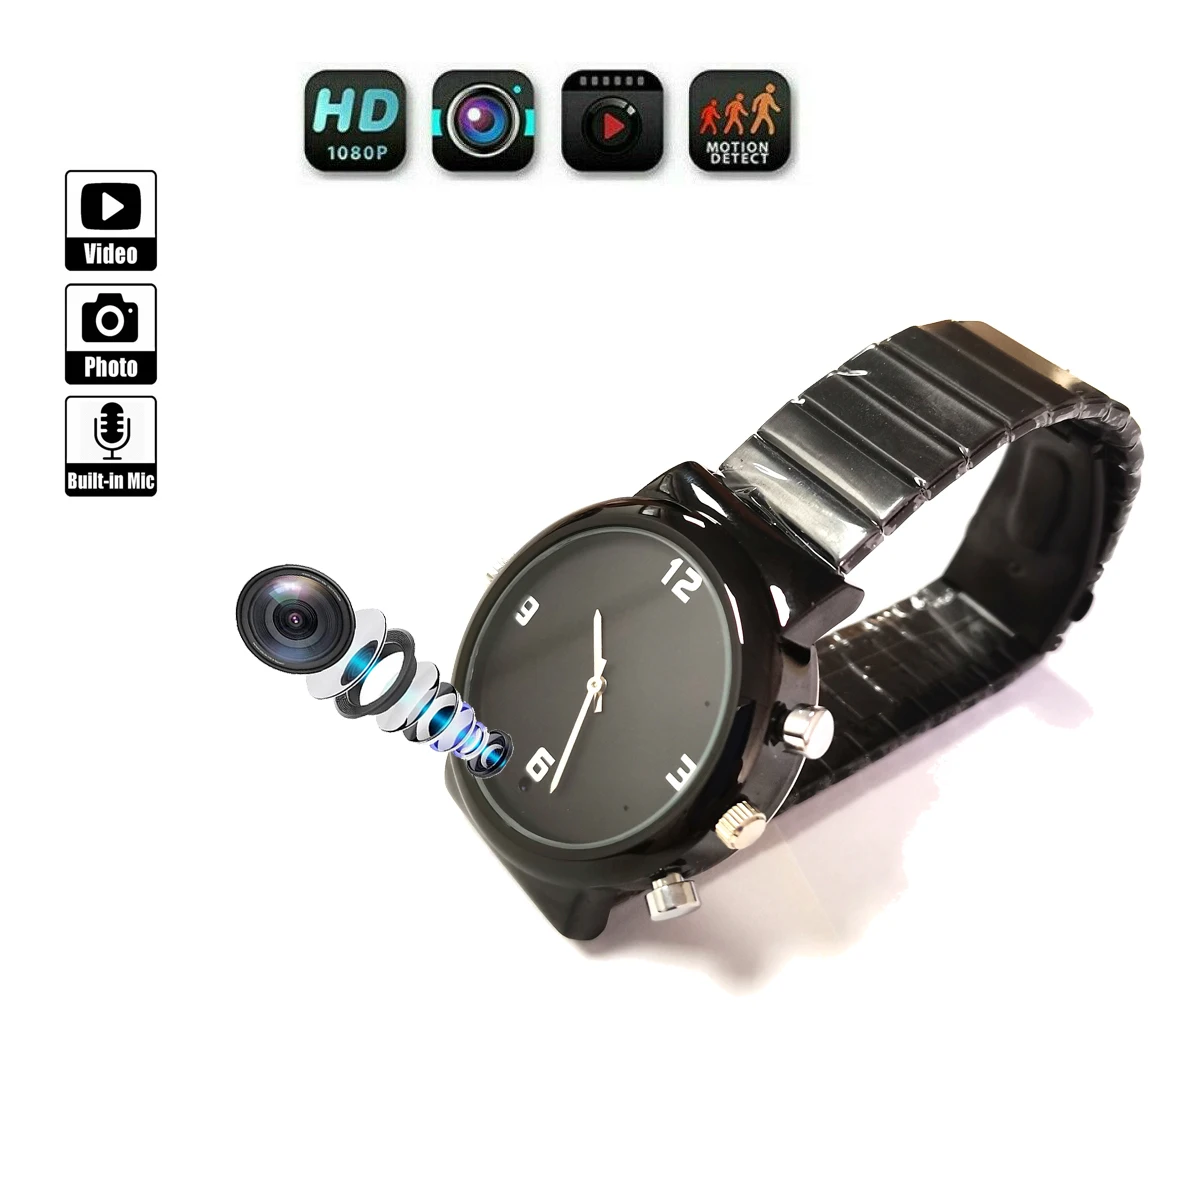 HD 1080P Video Recorder Mini Camera Watch with Cameras Voice Recorder Micro Camcorder Action Cam Motion Detection Photo Men Lens